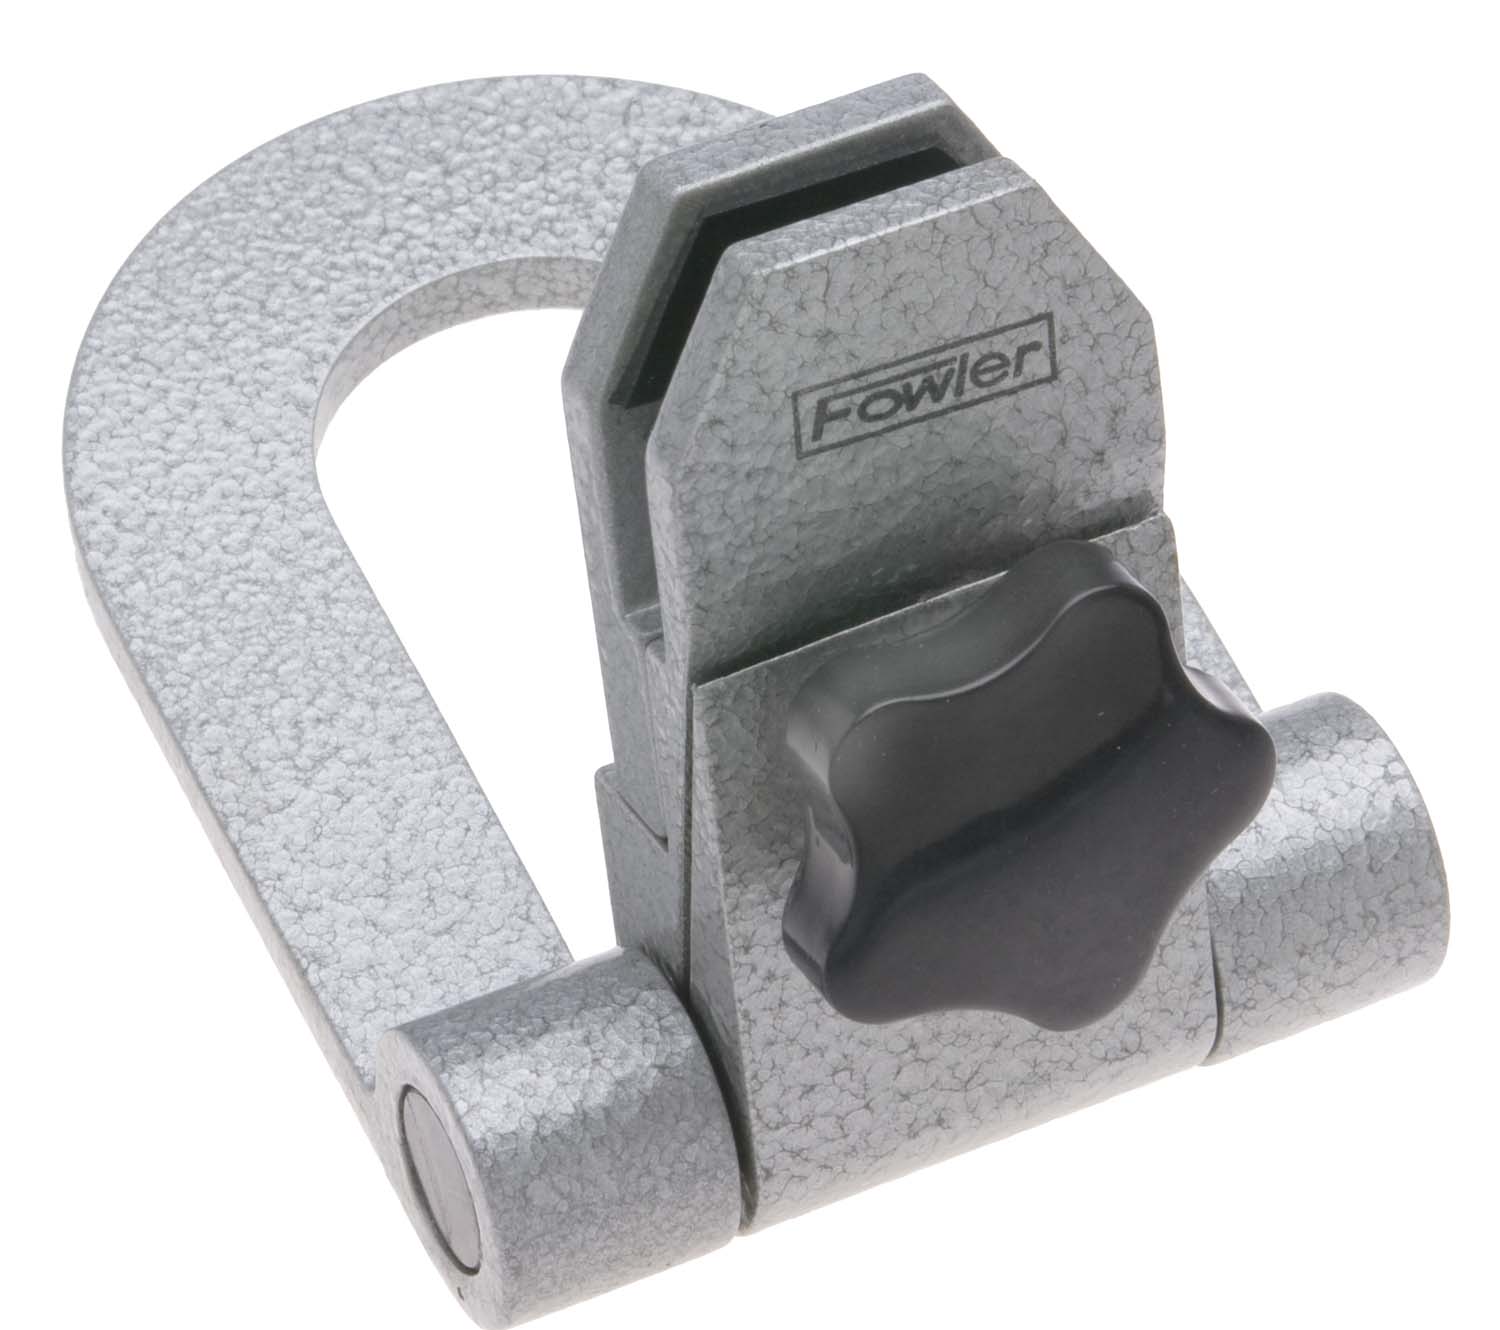 Fowler 52-247-005 Folding Micrometer Stand